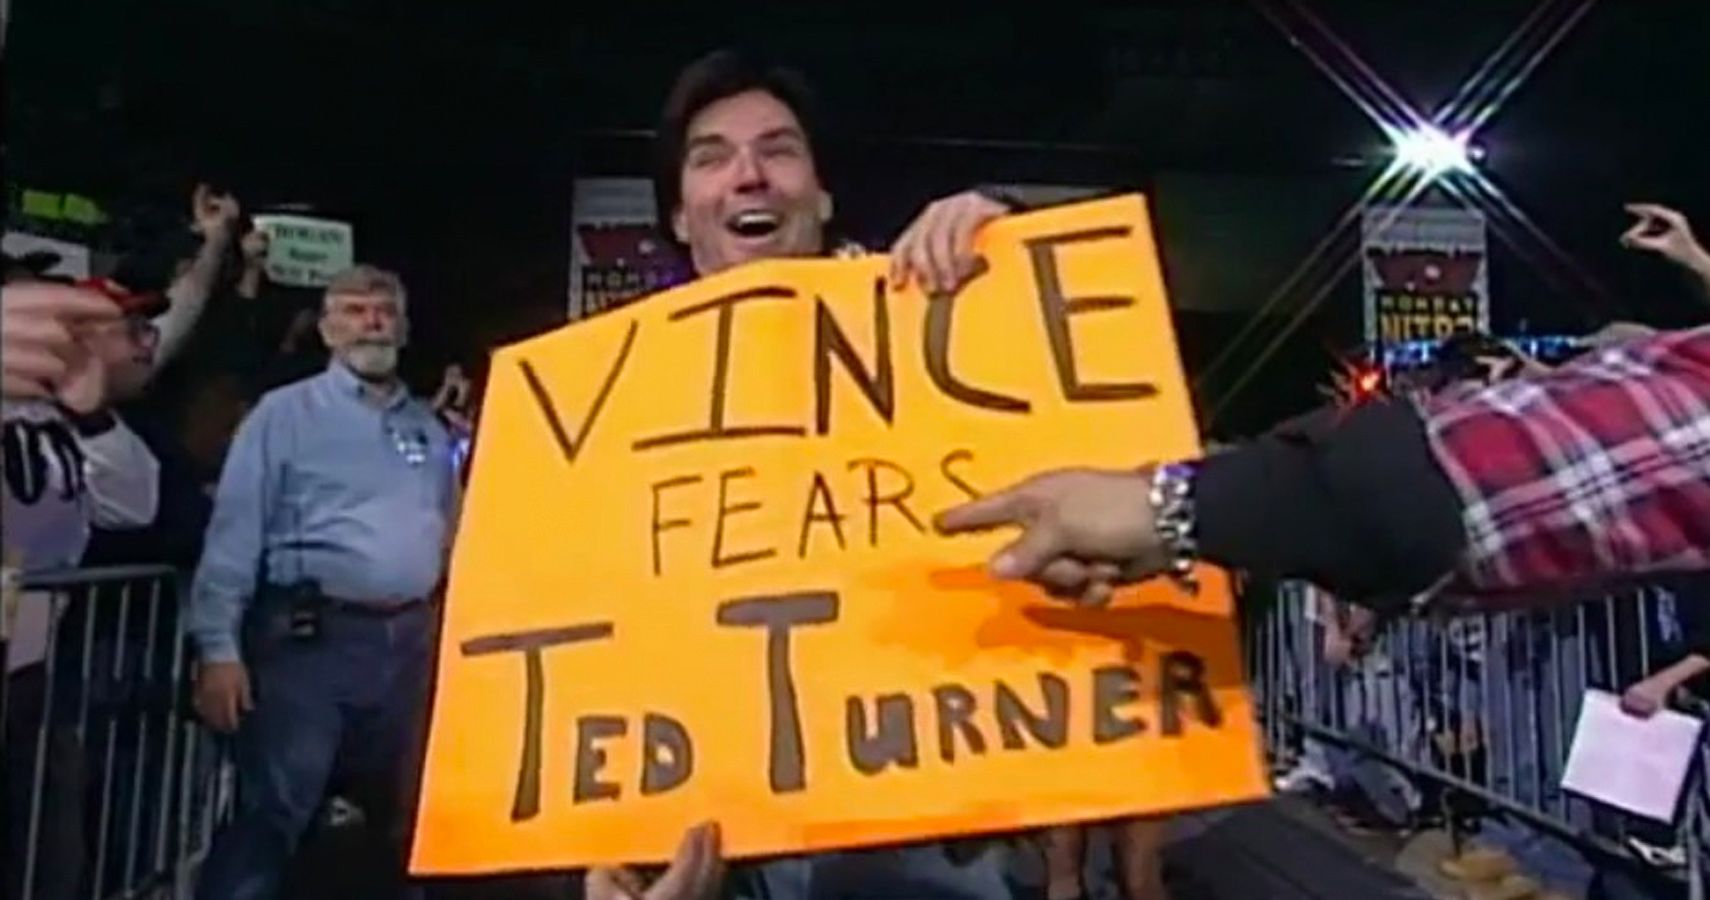 Eric-Bischoff-Vince-Fears-Ted-Turner-Sig